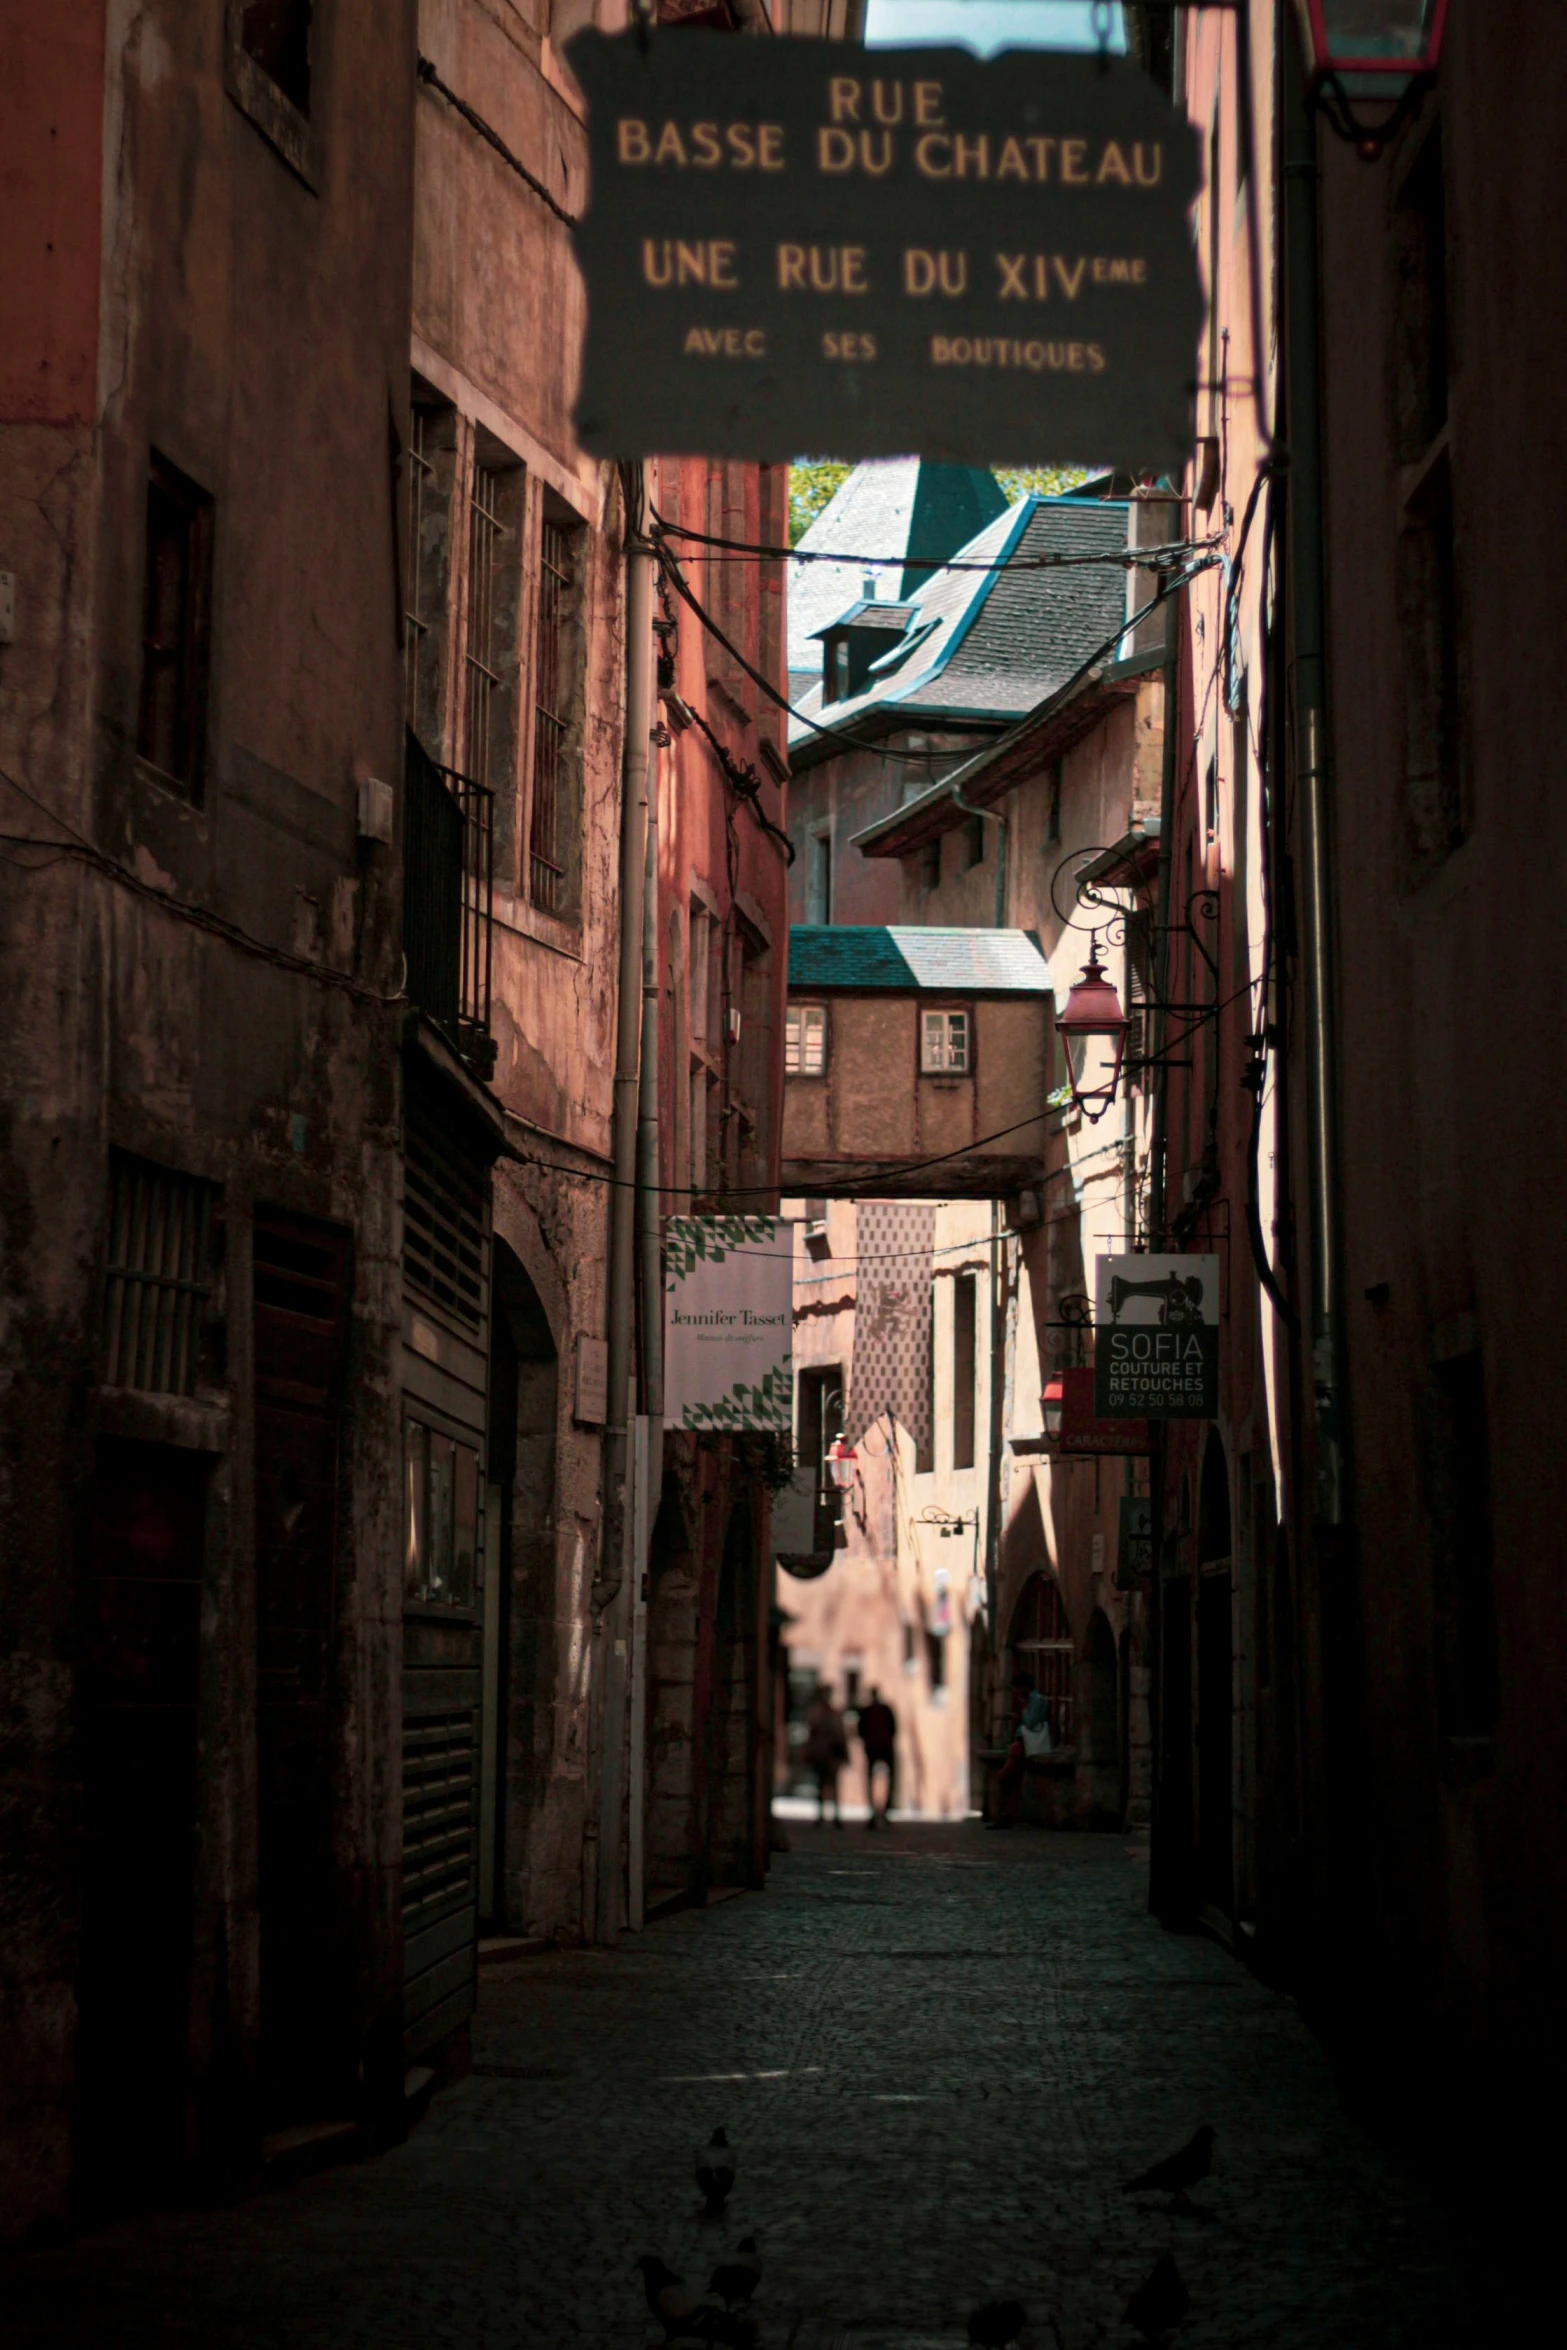 a narrow city street with old buildings and people